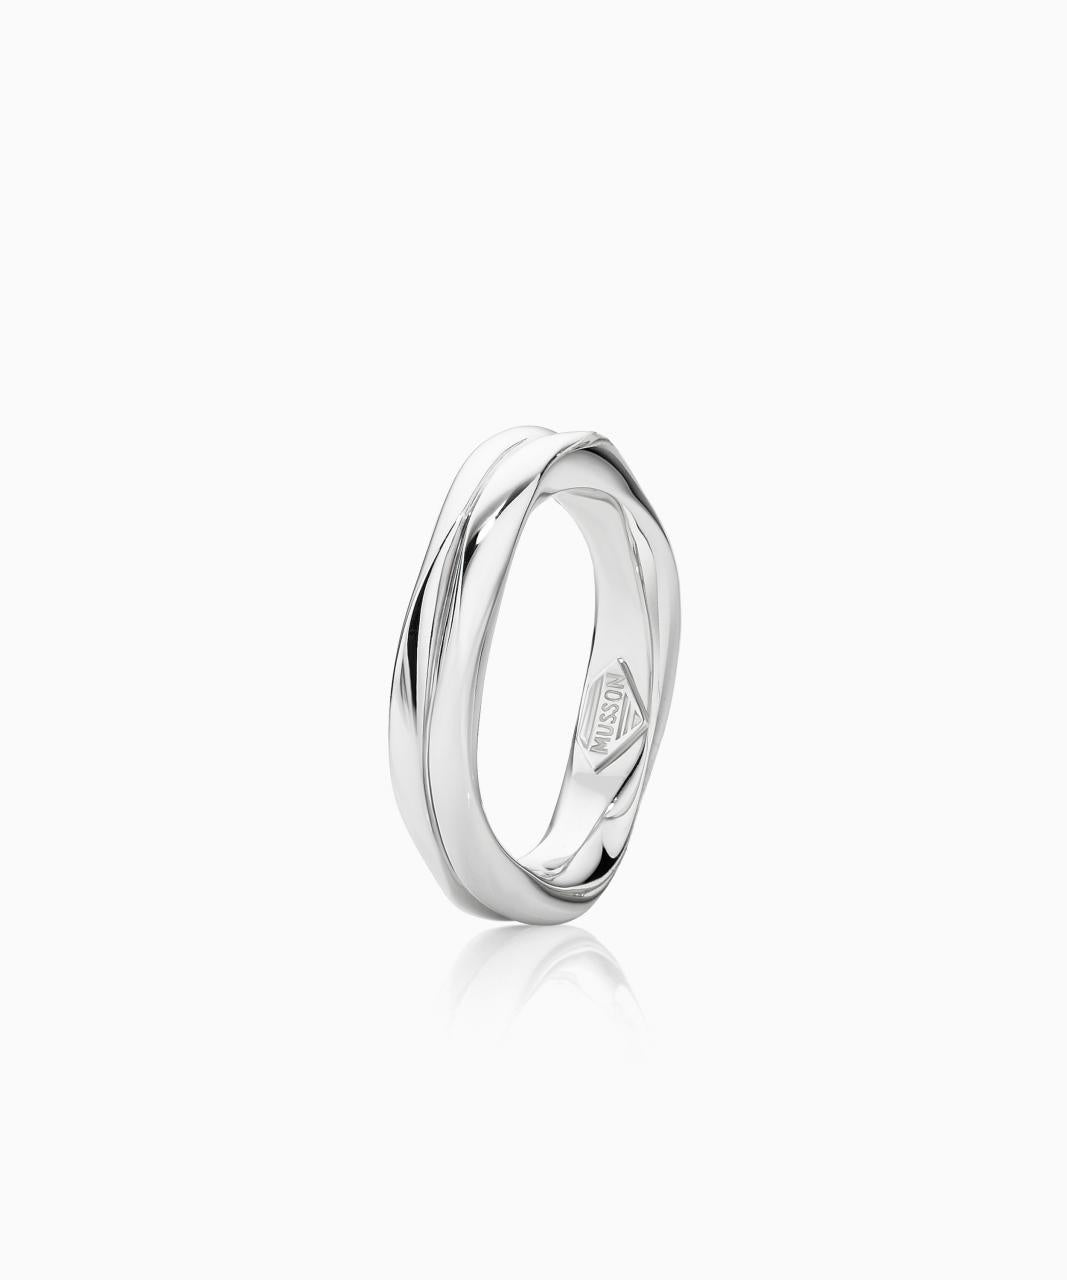 Entwined Wedding Ring - 5mm